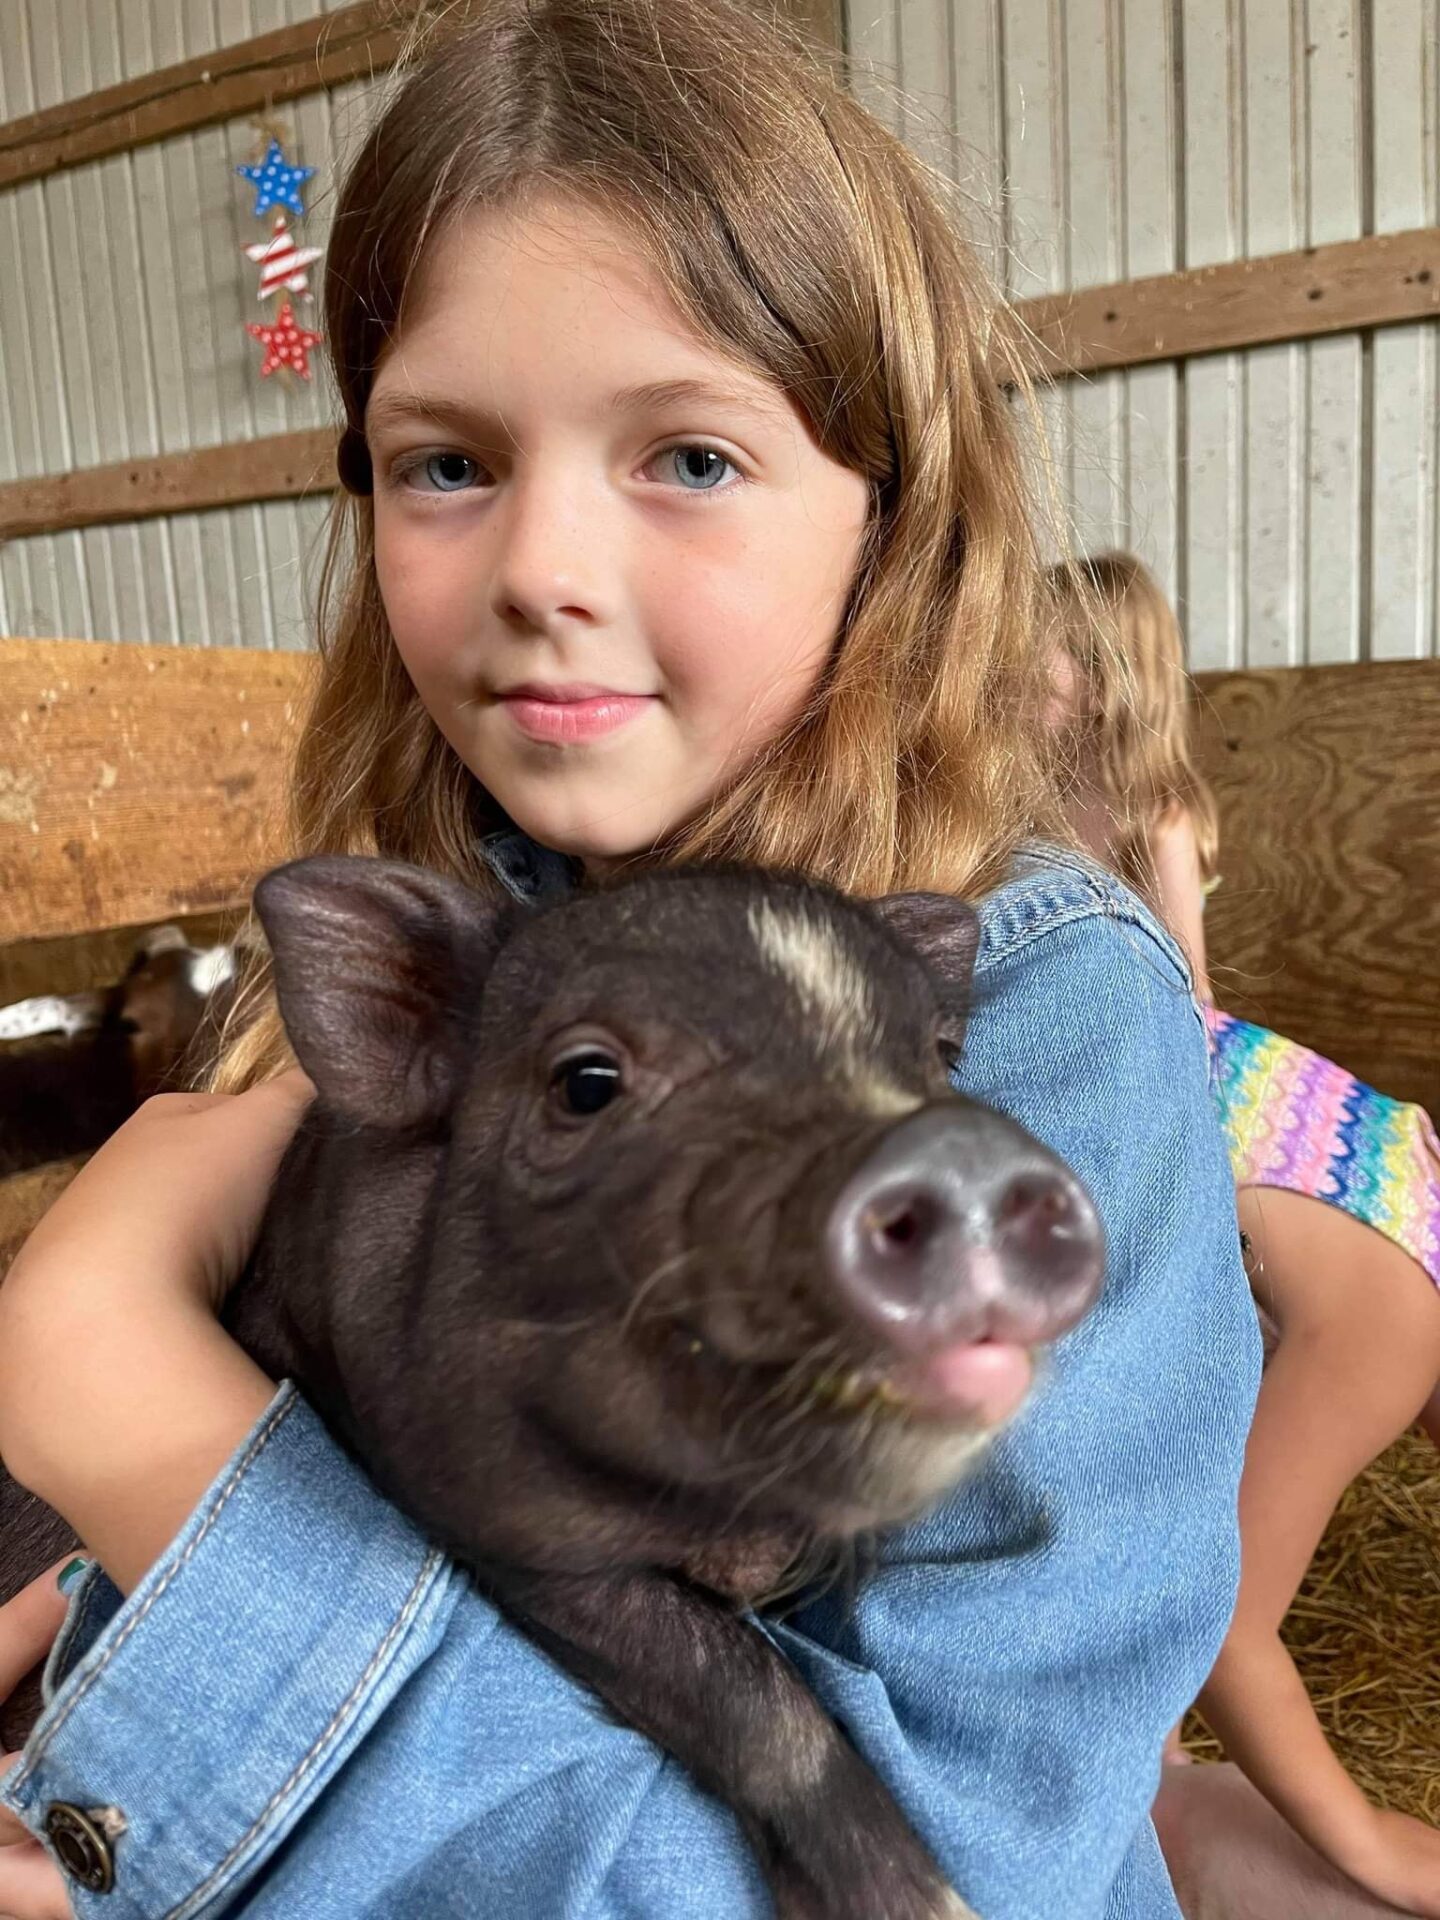 A Little Girl in Blue Holding a baby Calf